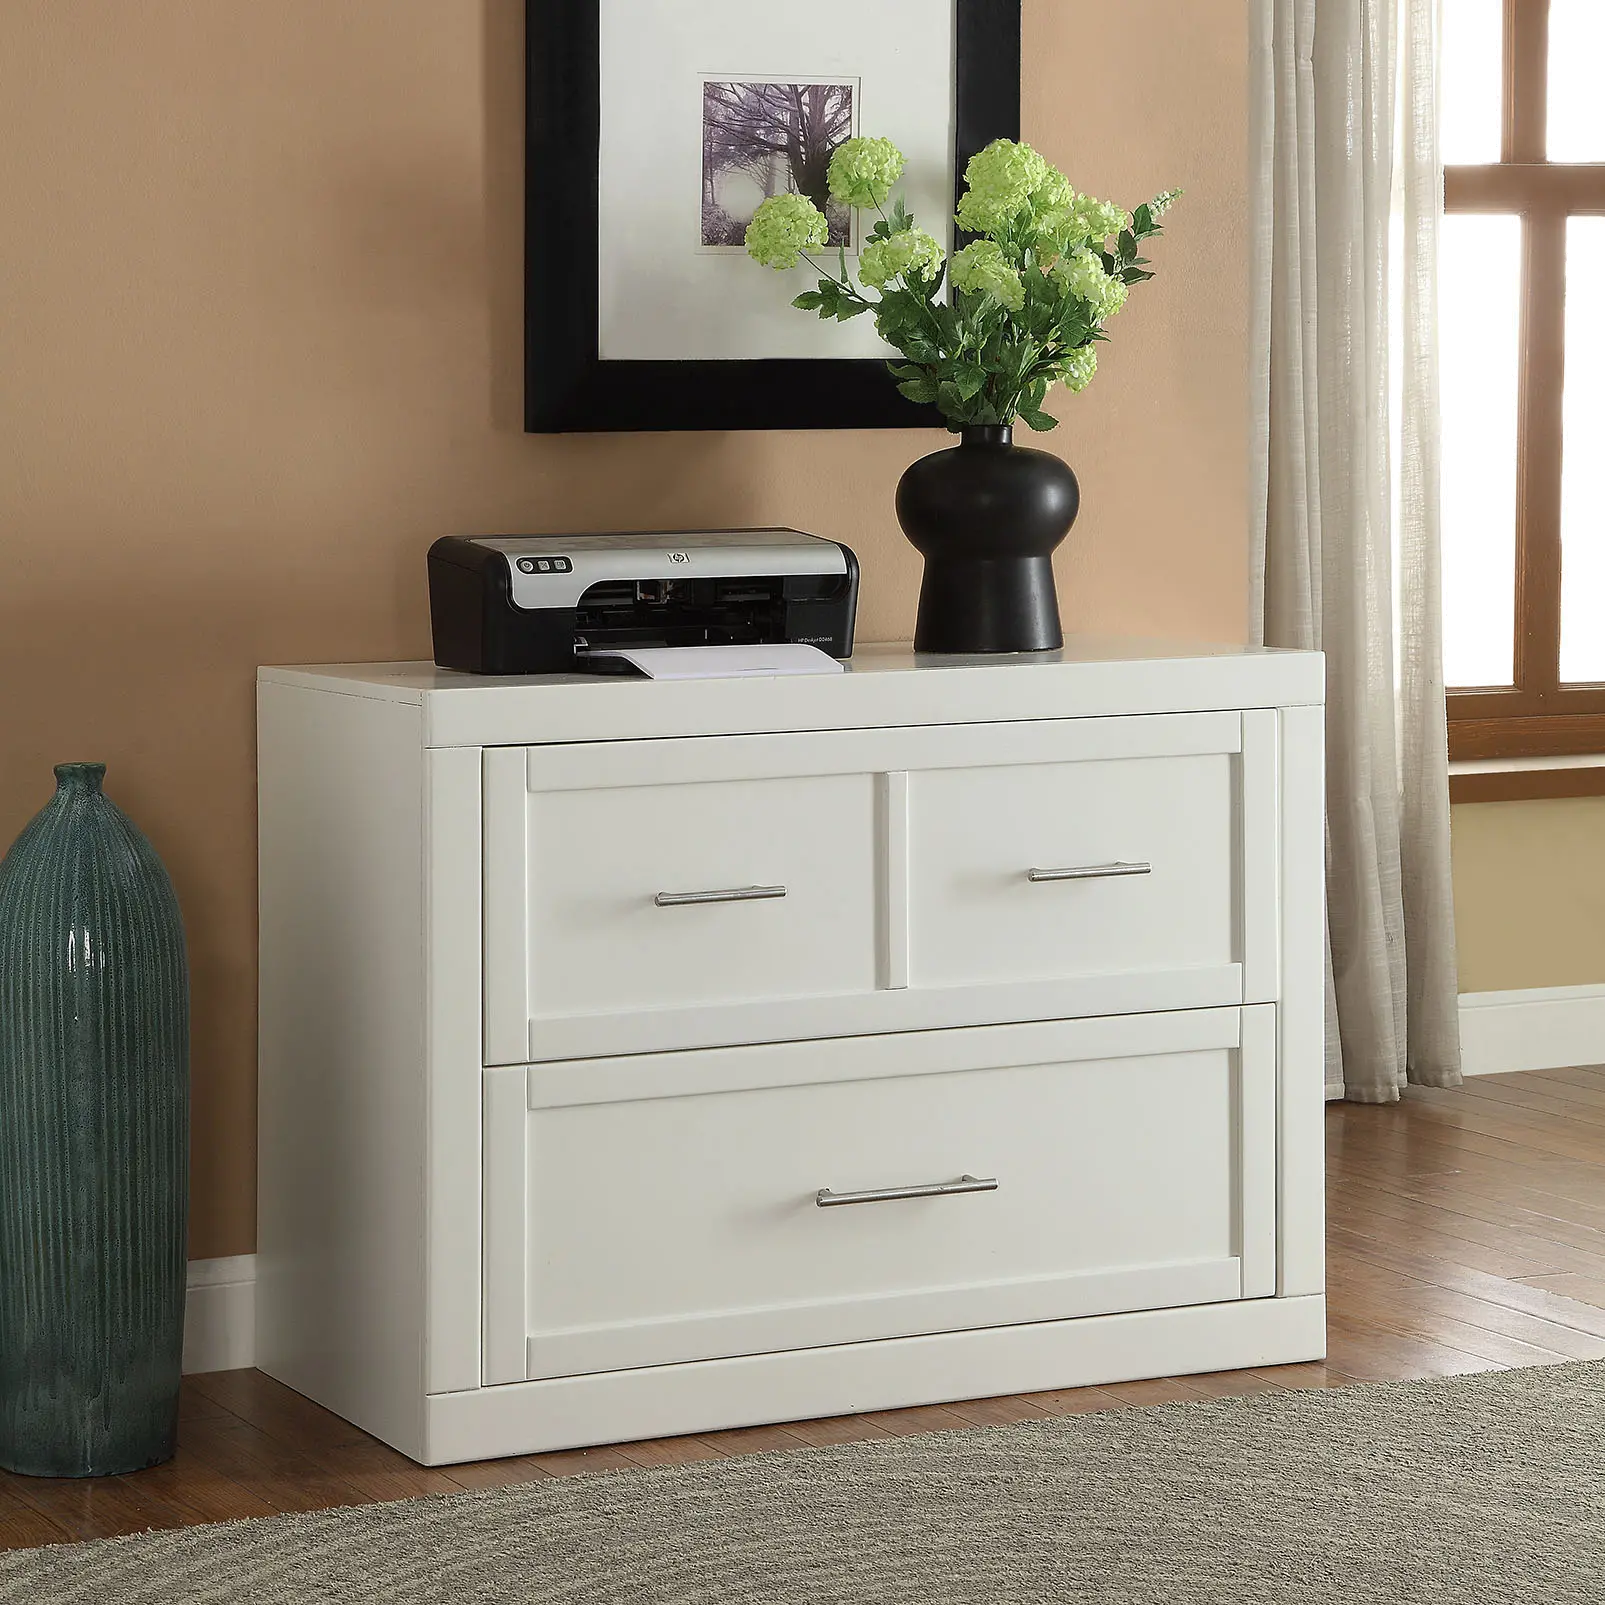 Catrina White 2 Drawer Lateral File Cabinet